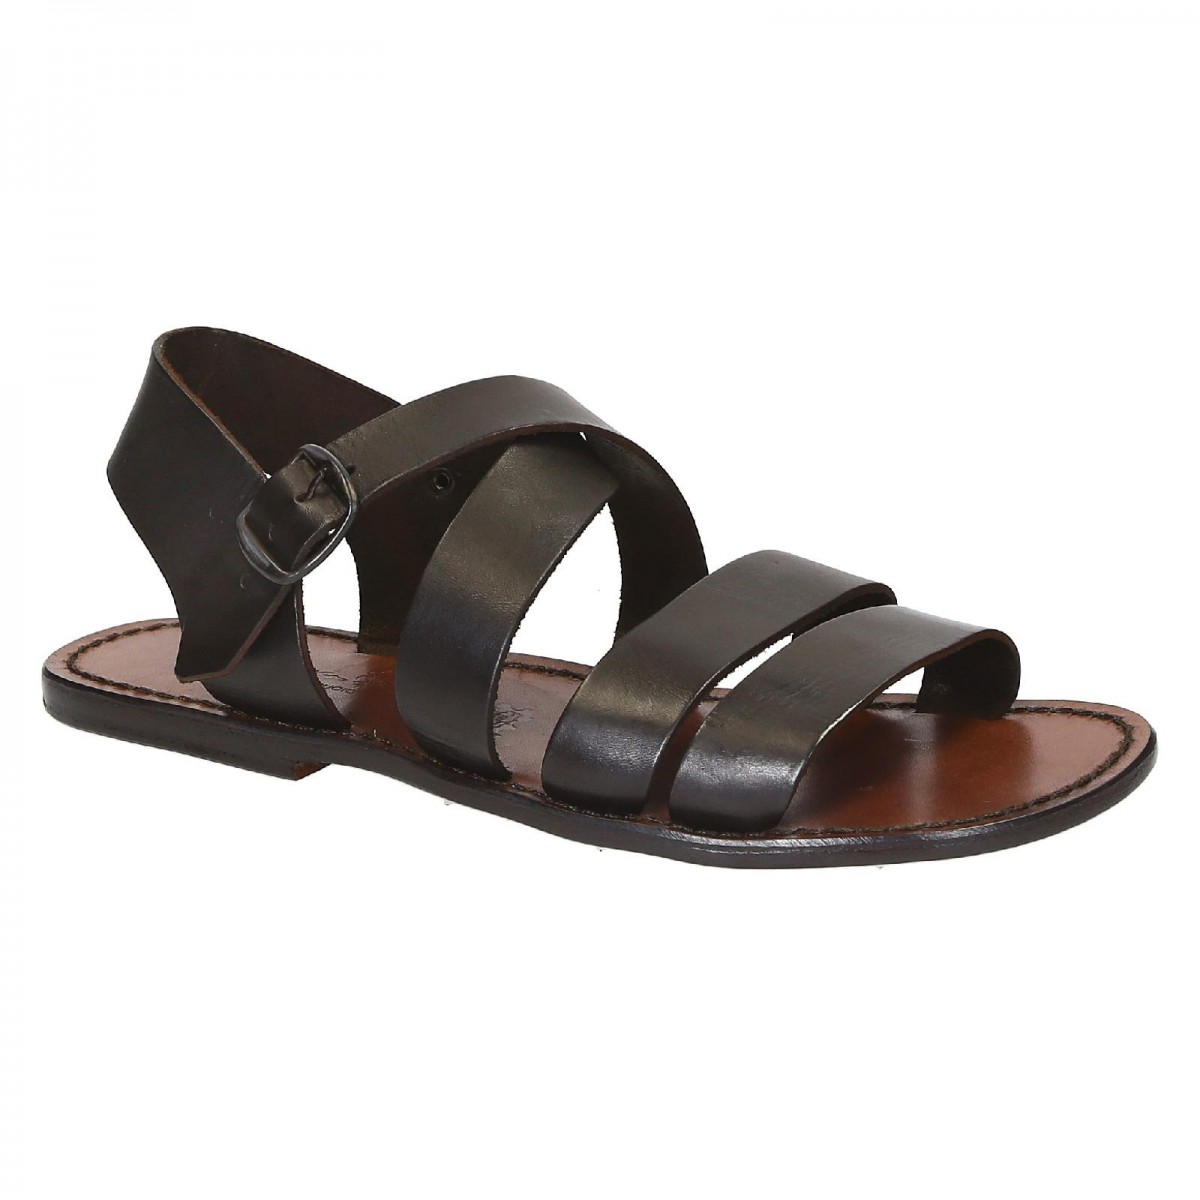 Share 148+ traditional leather sandals latest - awesomeenglish.edu.vn